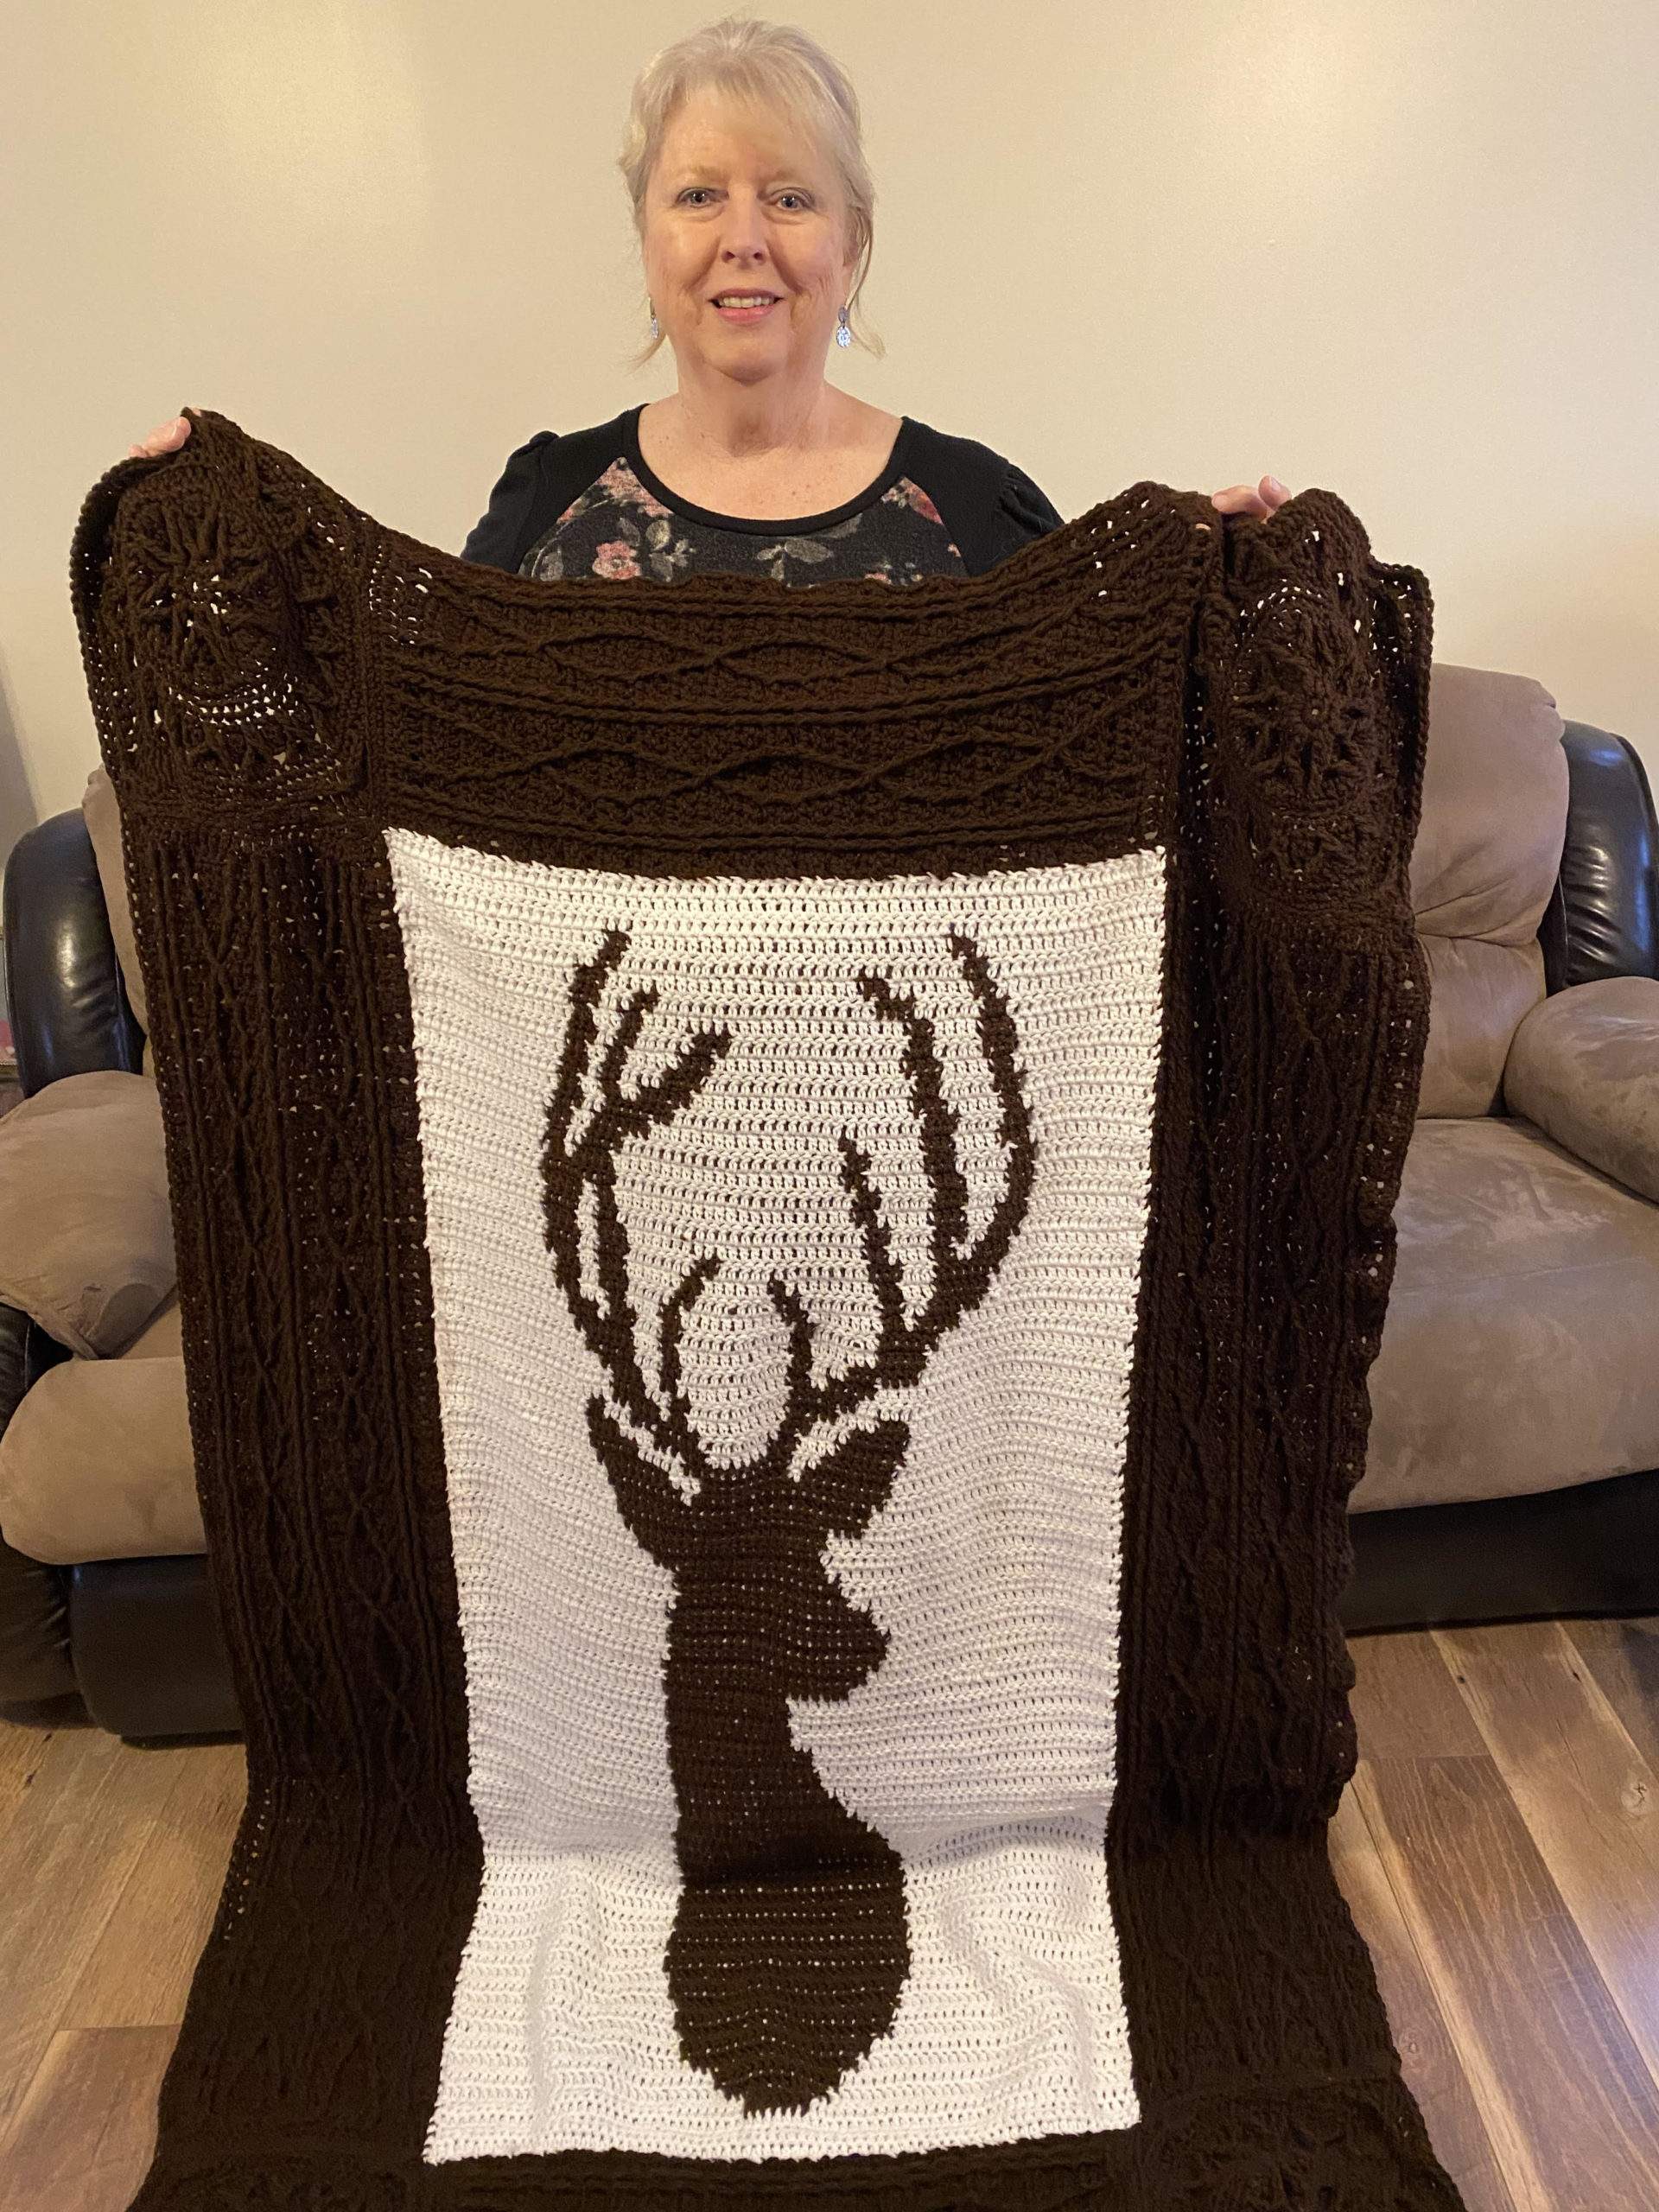 A woman holding a brown blanket with a white square containing a deer head crocheted in the middle.